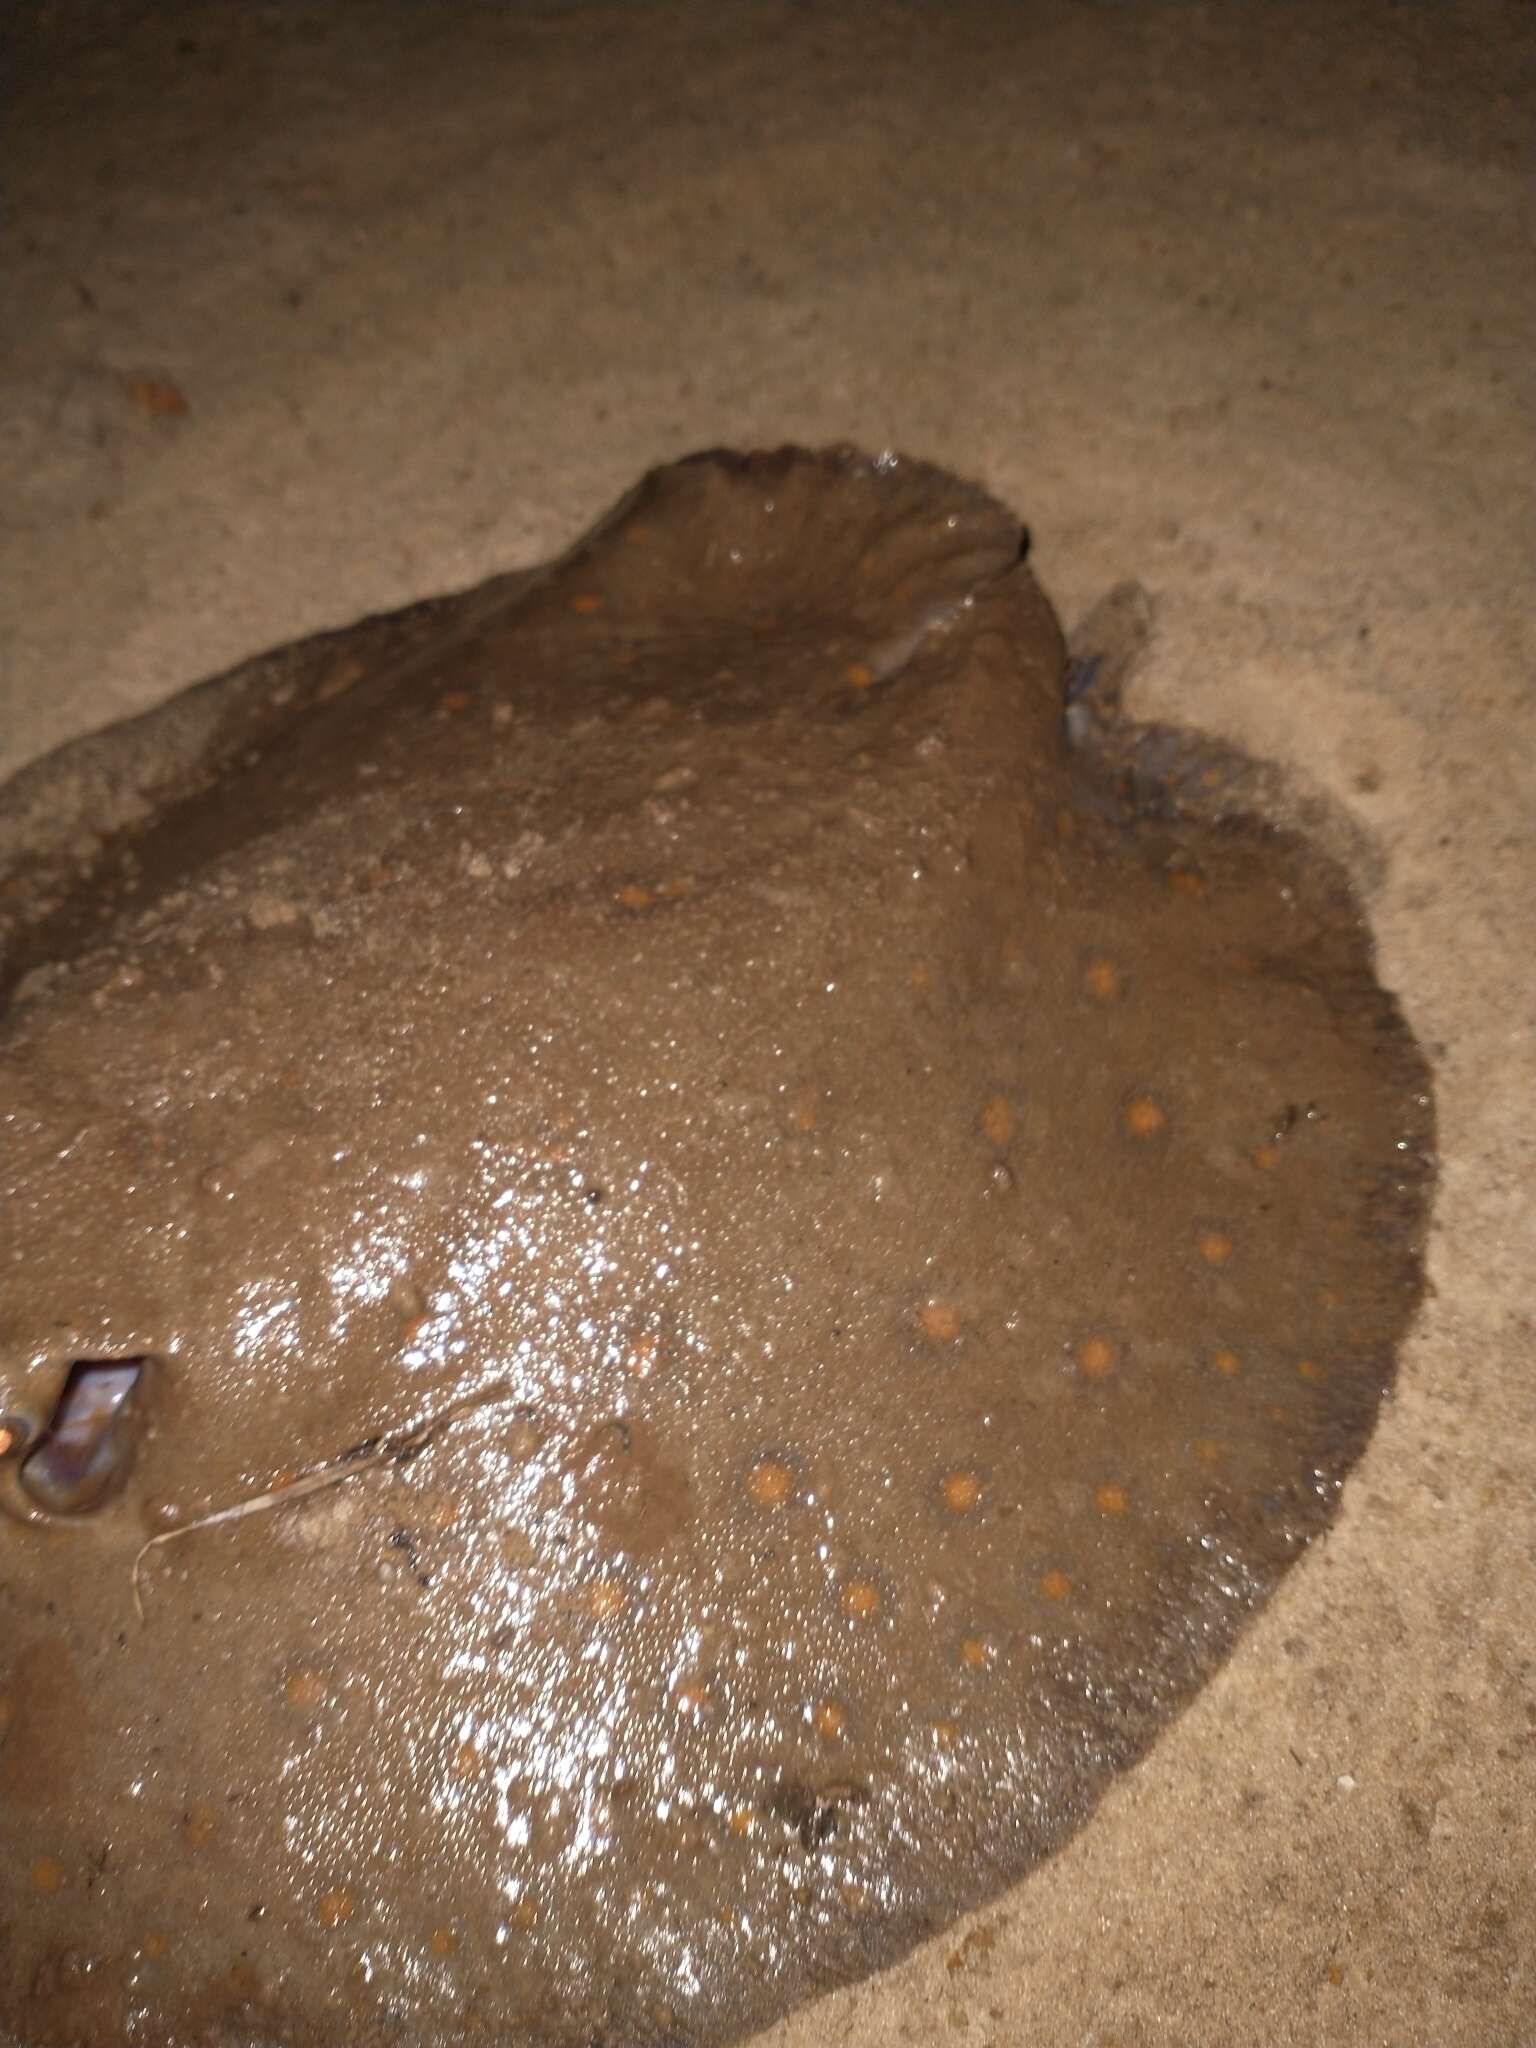 Image of Ocellate River Stingray